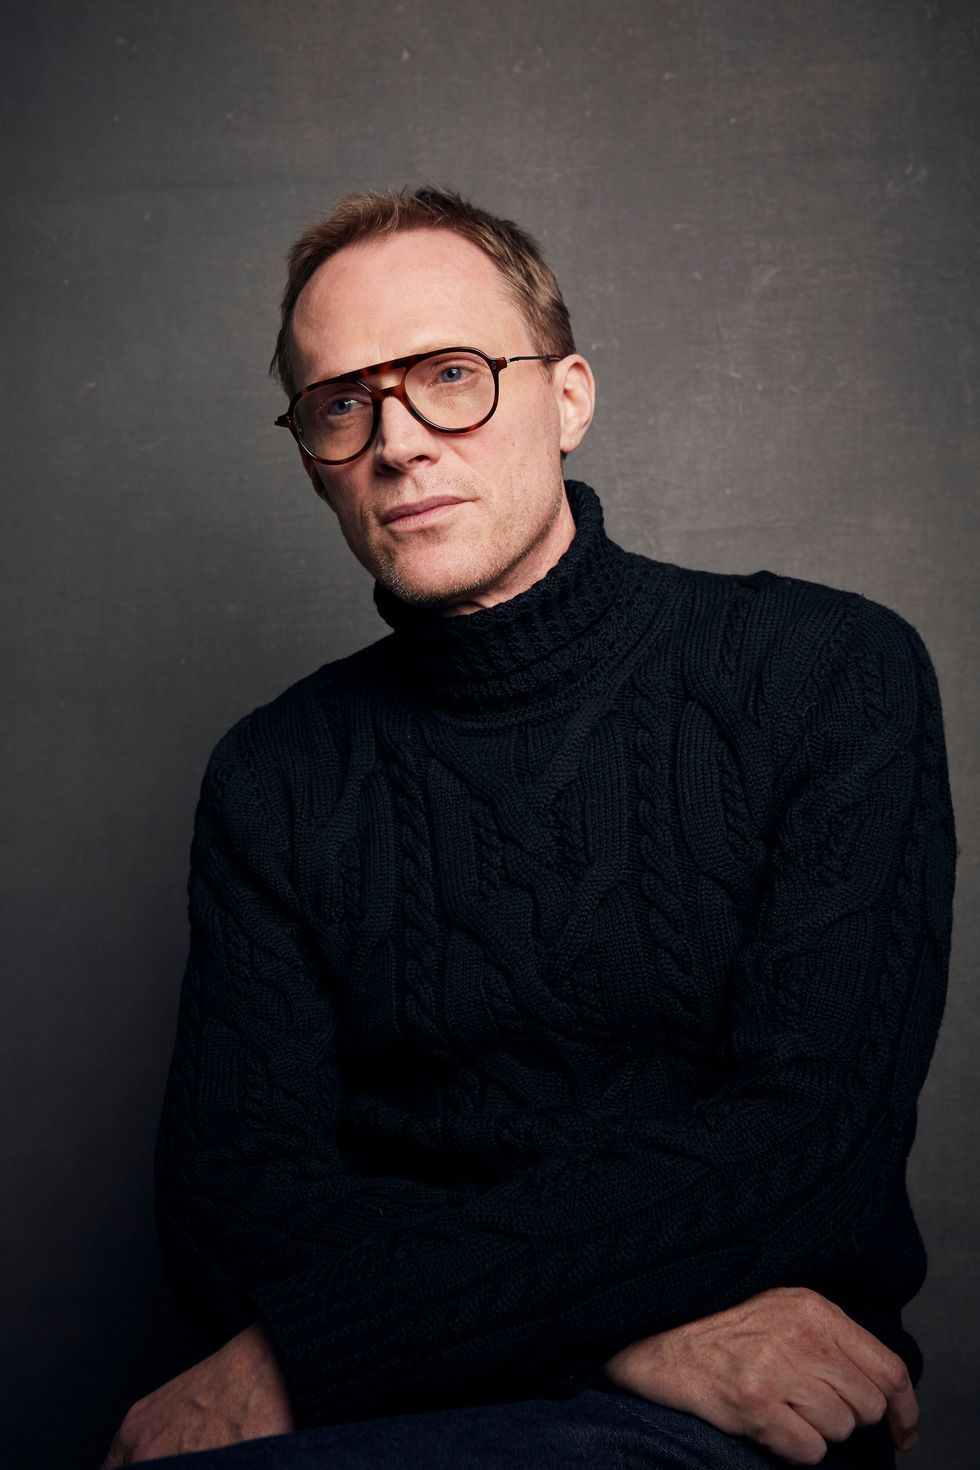 mandatory credit photo by taylor jewellinvisionapshutterstock 10540025c
paul bettany poses for a portrait to promote the film uncle frank at the music lodge during the sundance film festival, in park city, utah
2020 sundance film festival   uncle frank portrait session, park city, usa   26 jan 2020